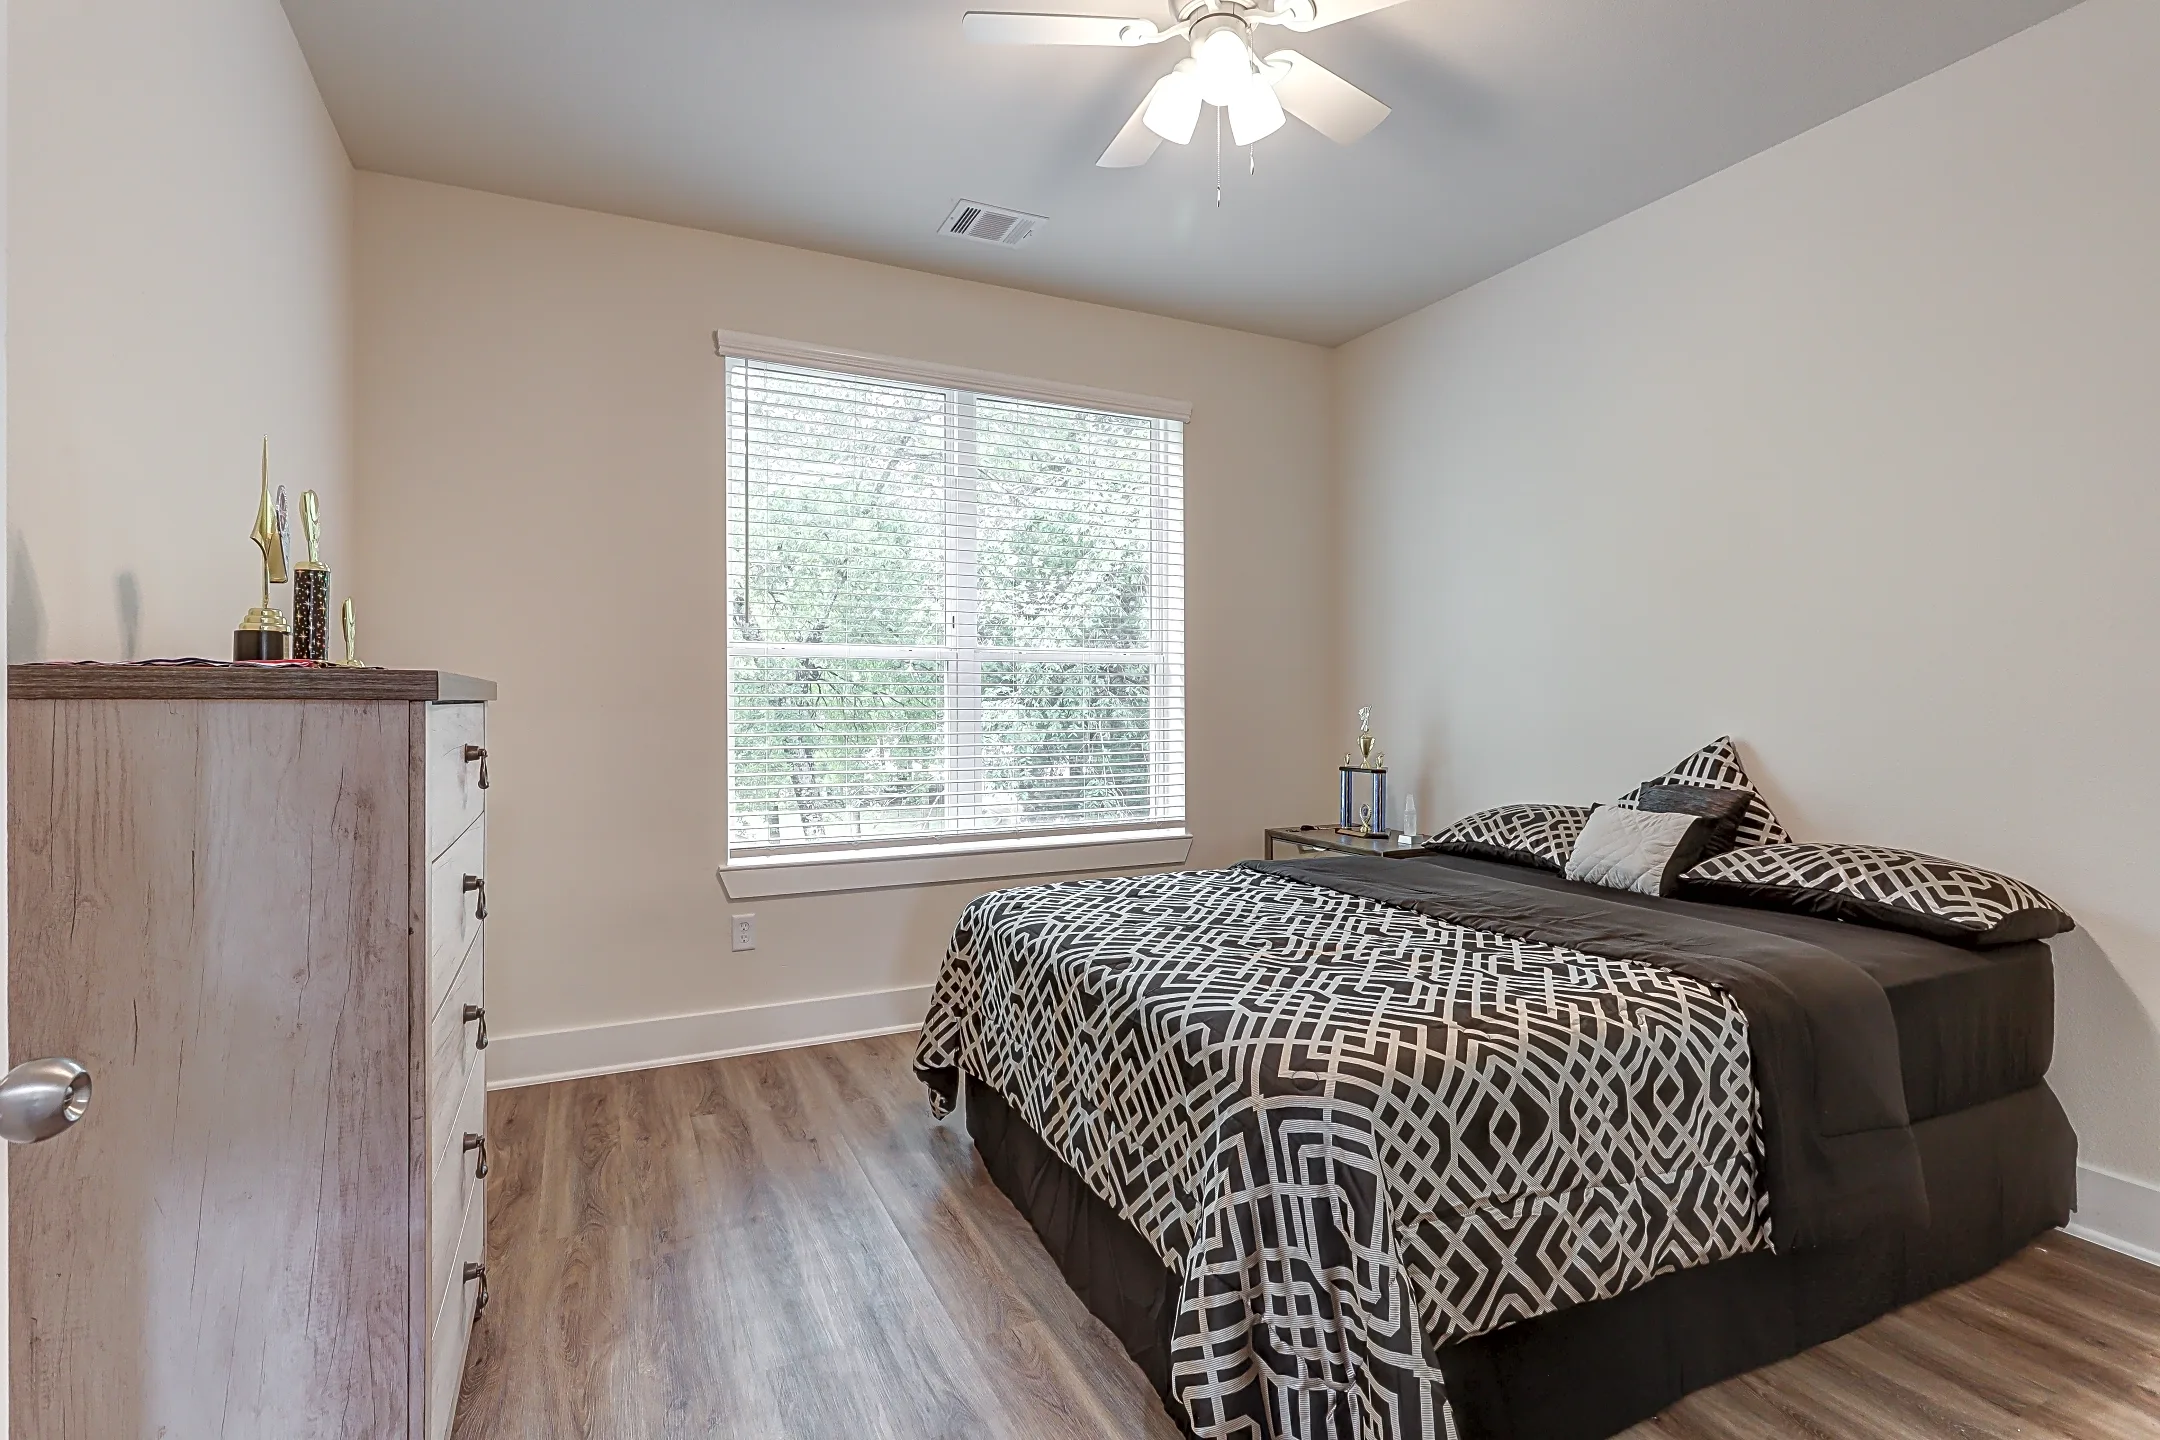 Bedroom - Azul Apartments - The Woodlands - Spring, TX